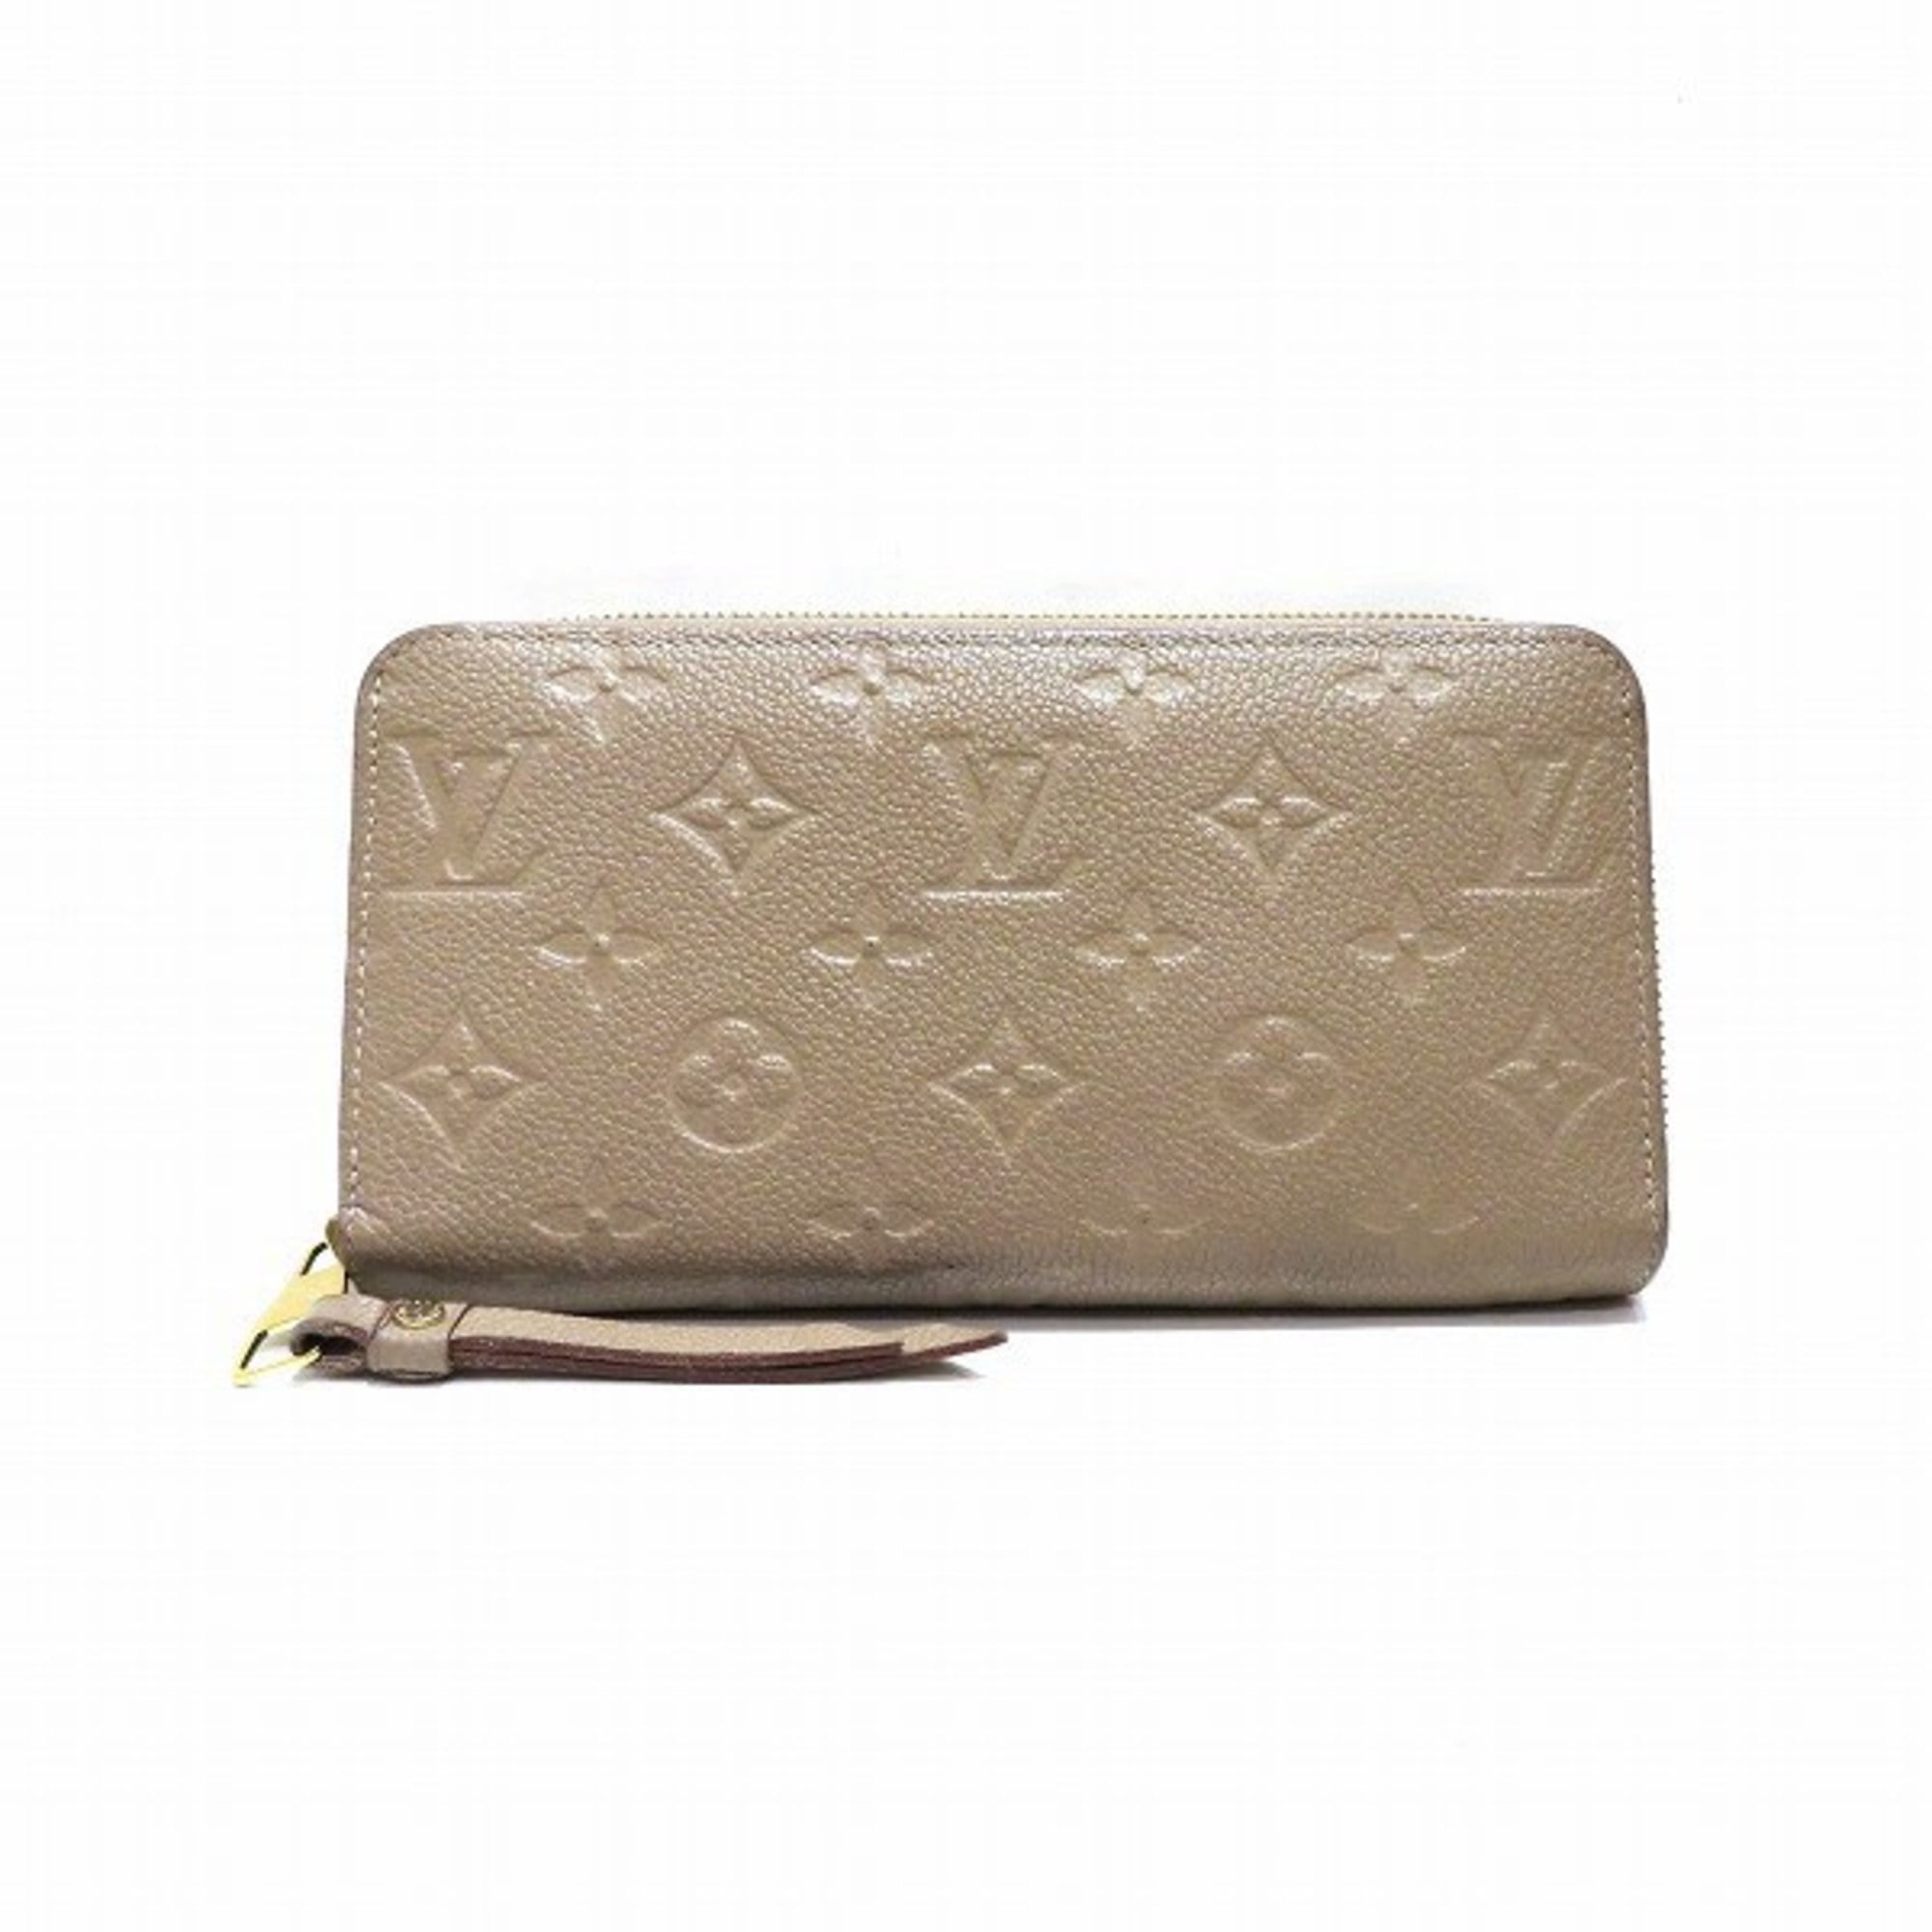 Louis Vuitton - Authenticated Zippy Wallet - Leather Brown for Women, Very Good Condition